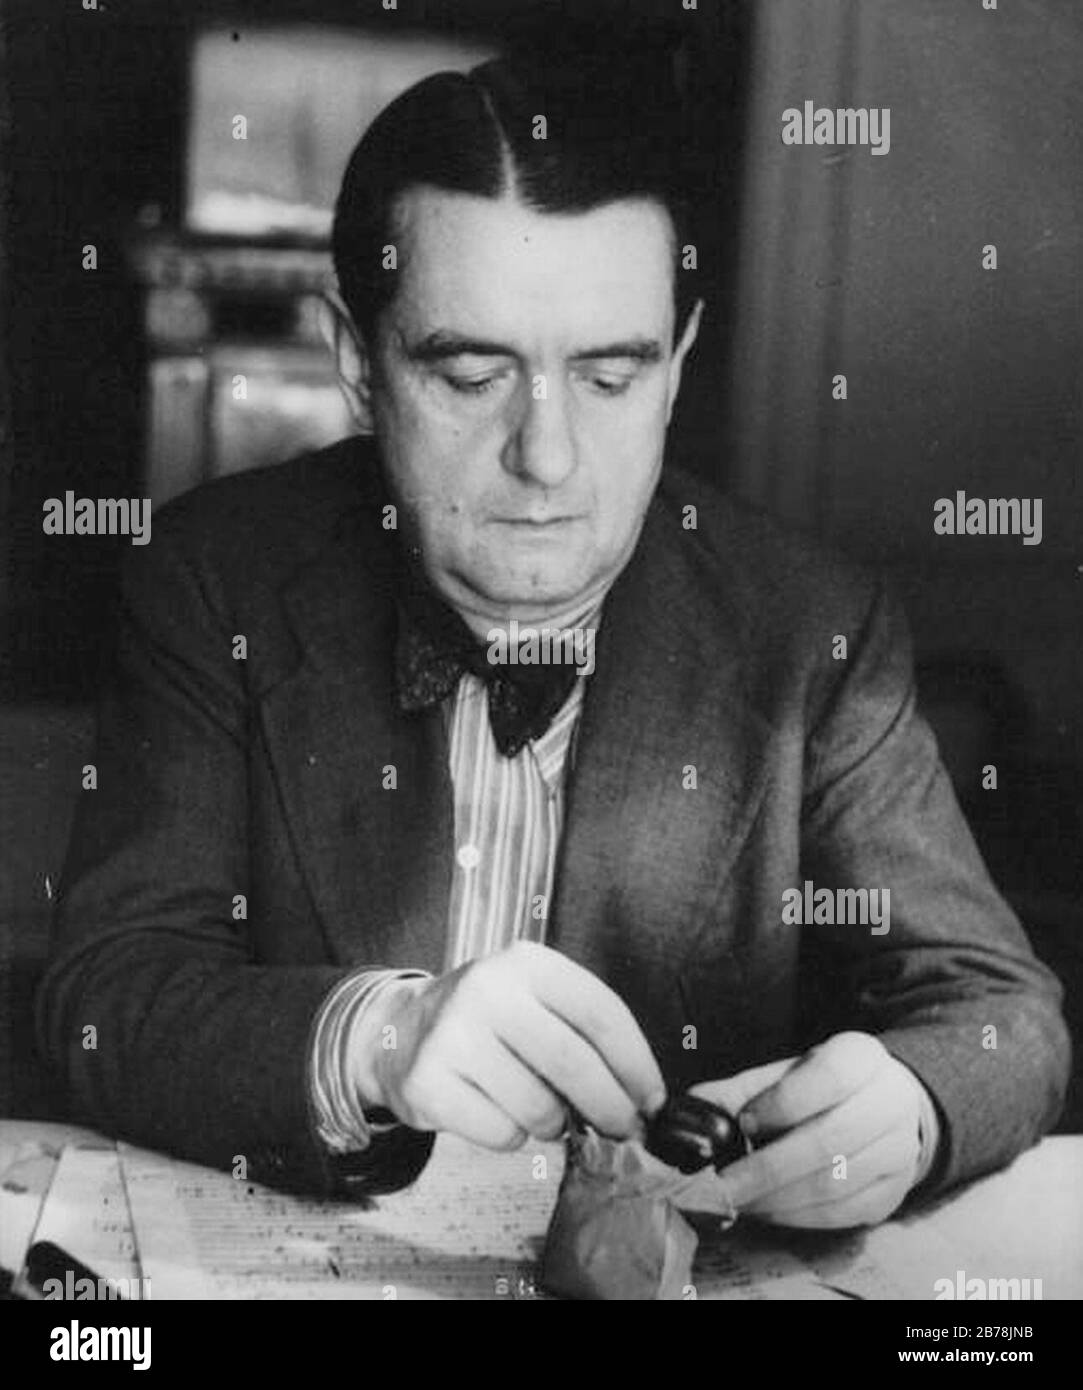 Georges Auric 1940. Stock Photo